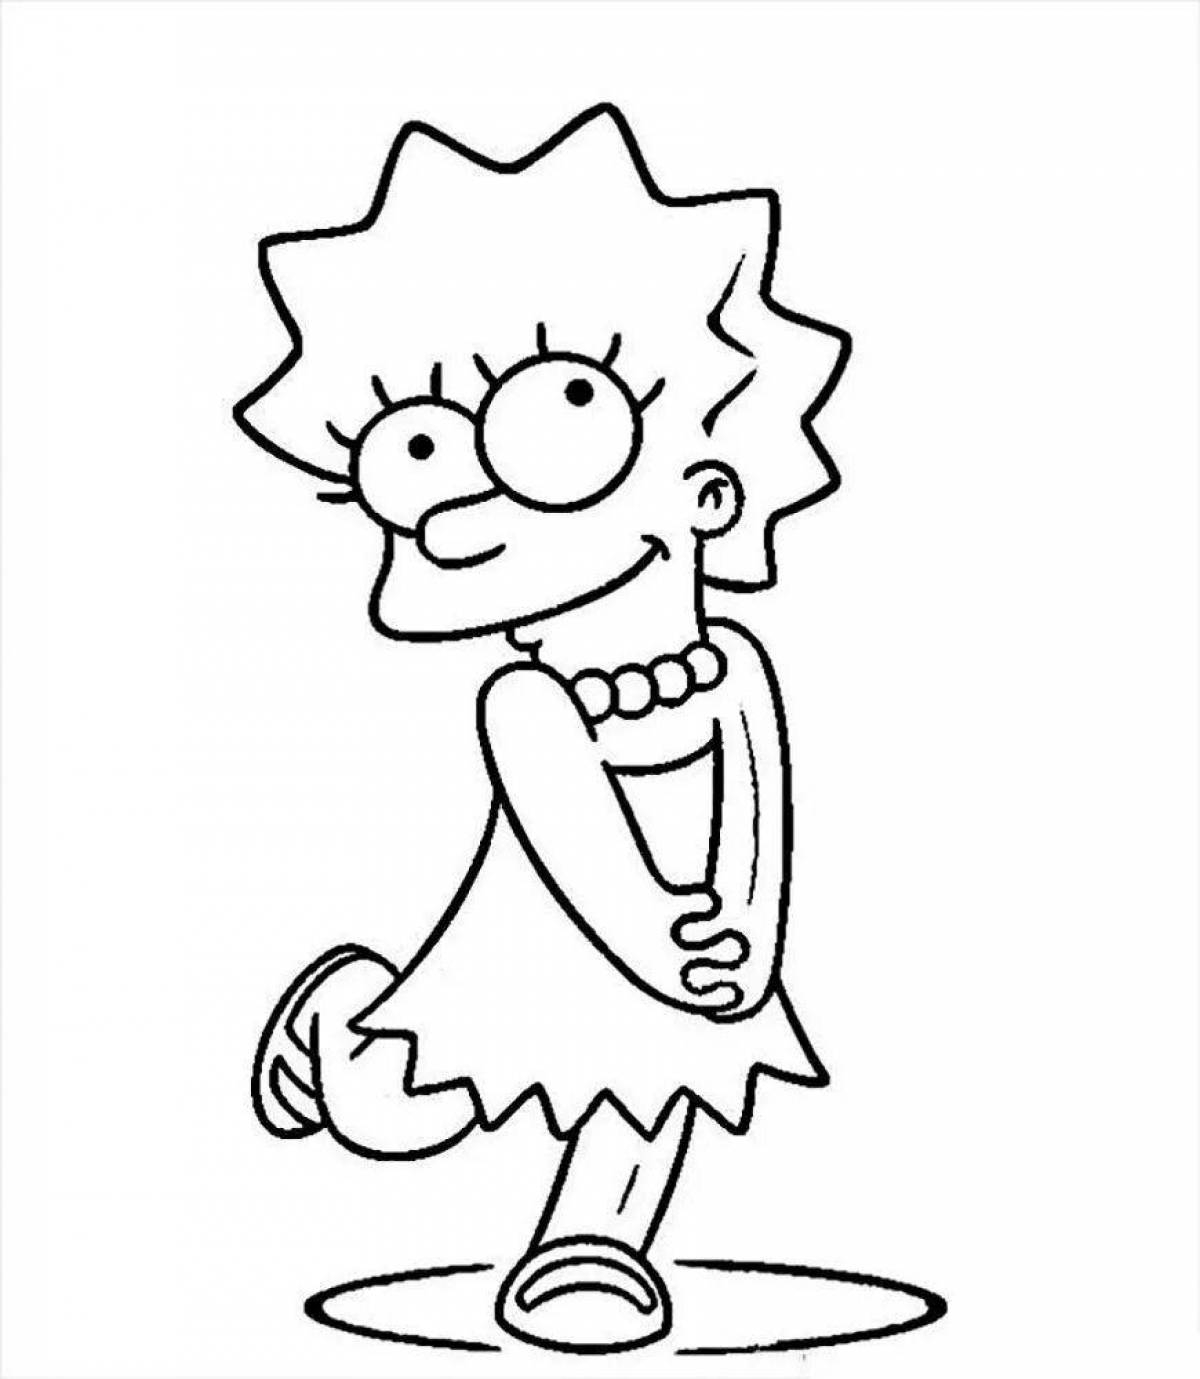 Colored lisa simpson coloring book